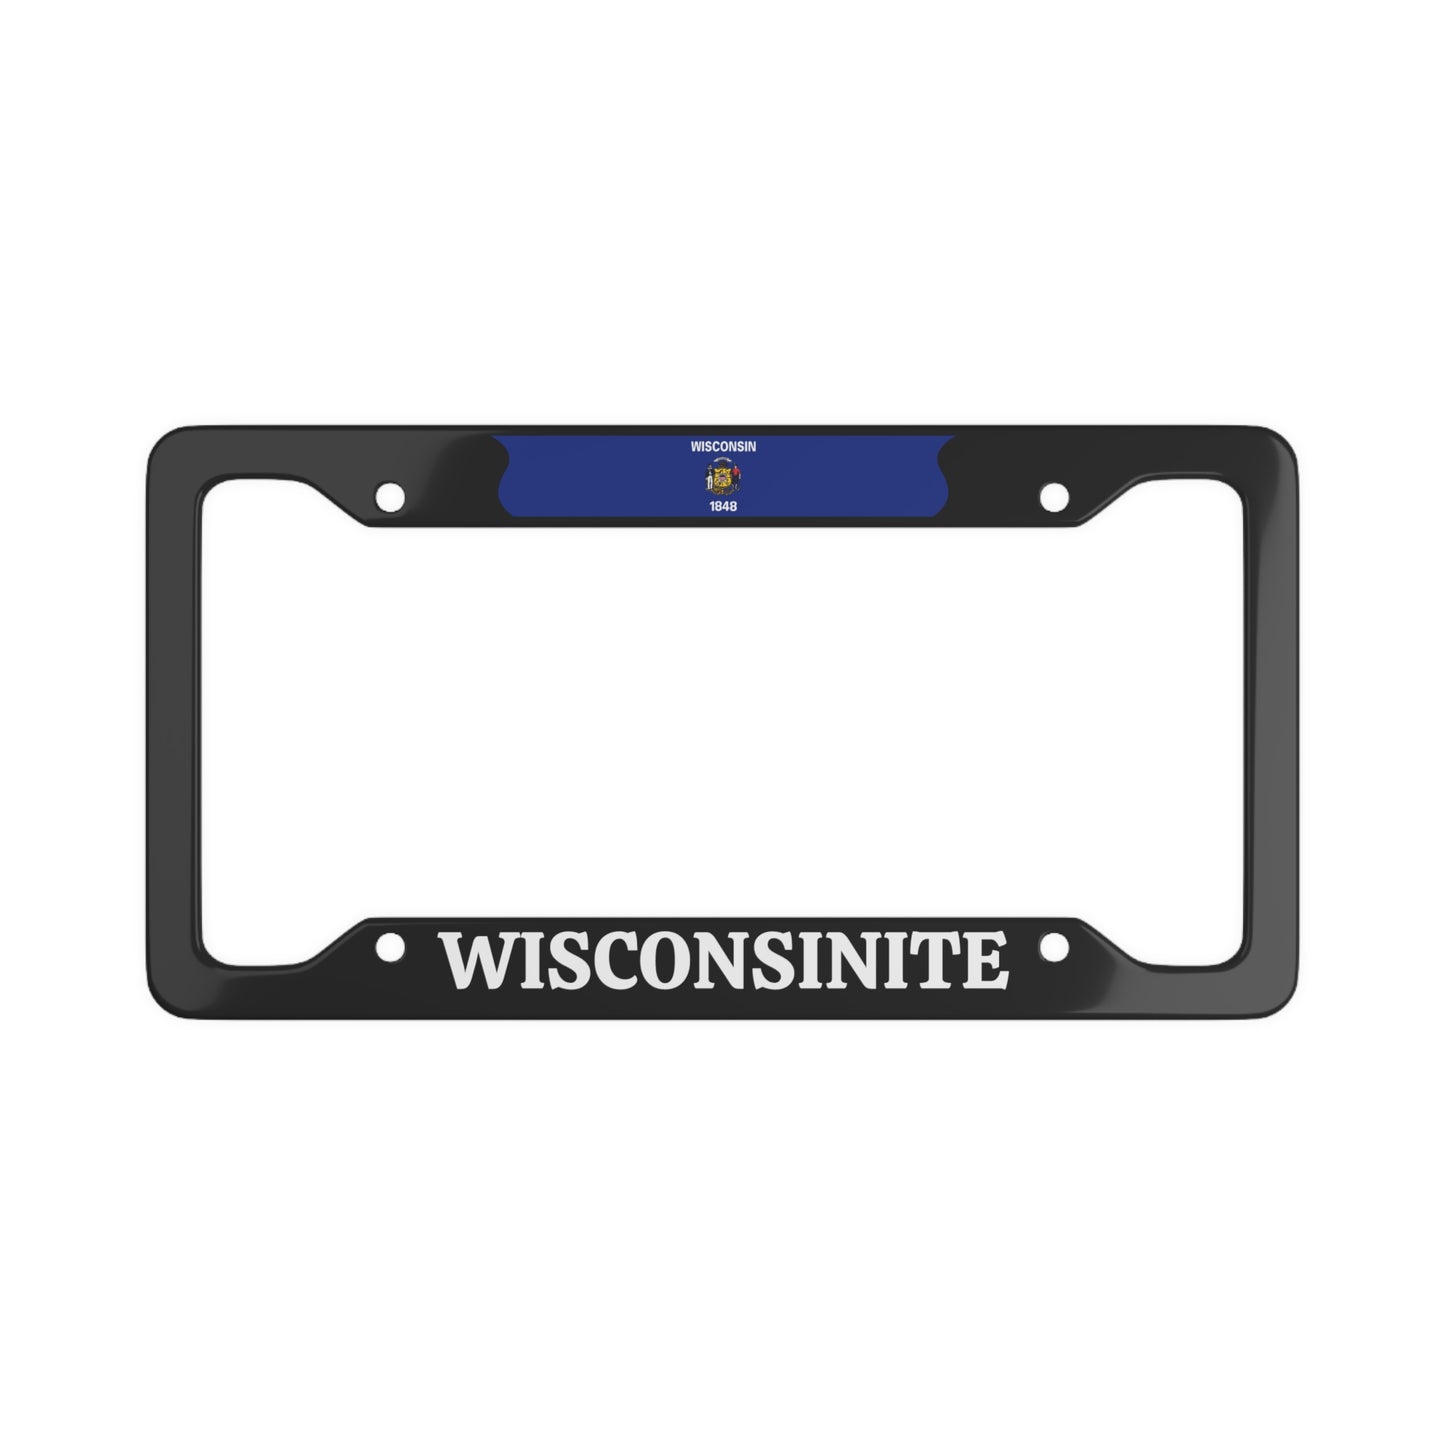 Wisconsinite, Wisconsin State, USA License Plate Frame